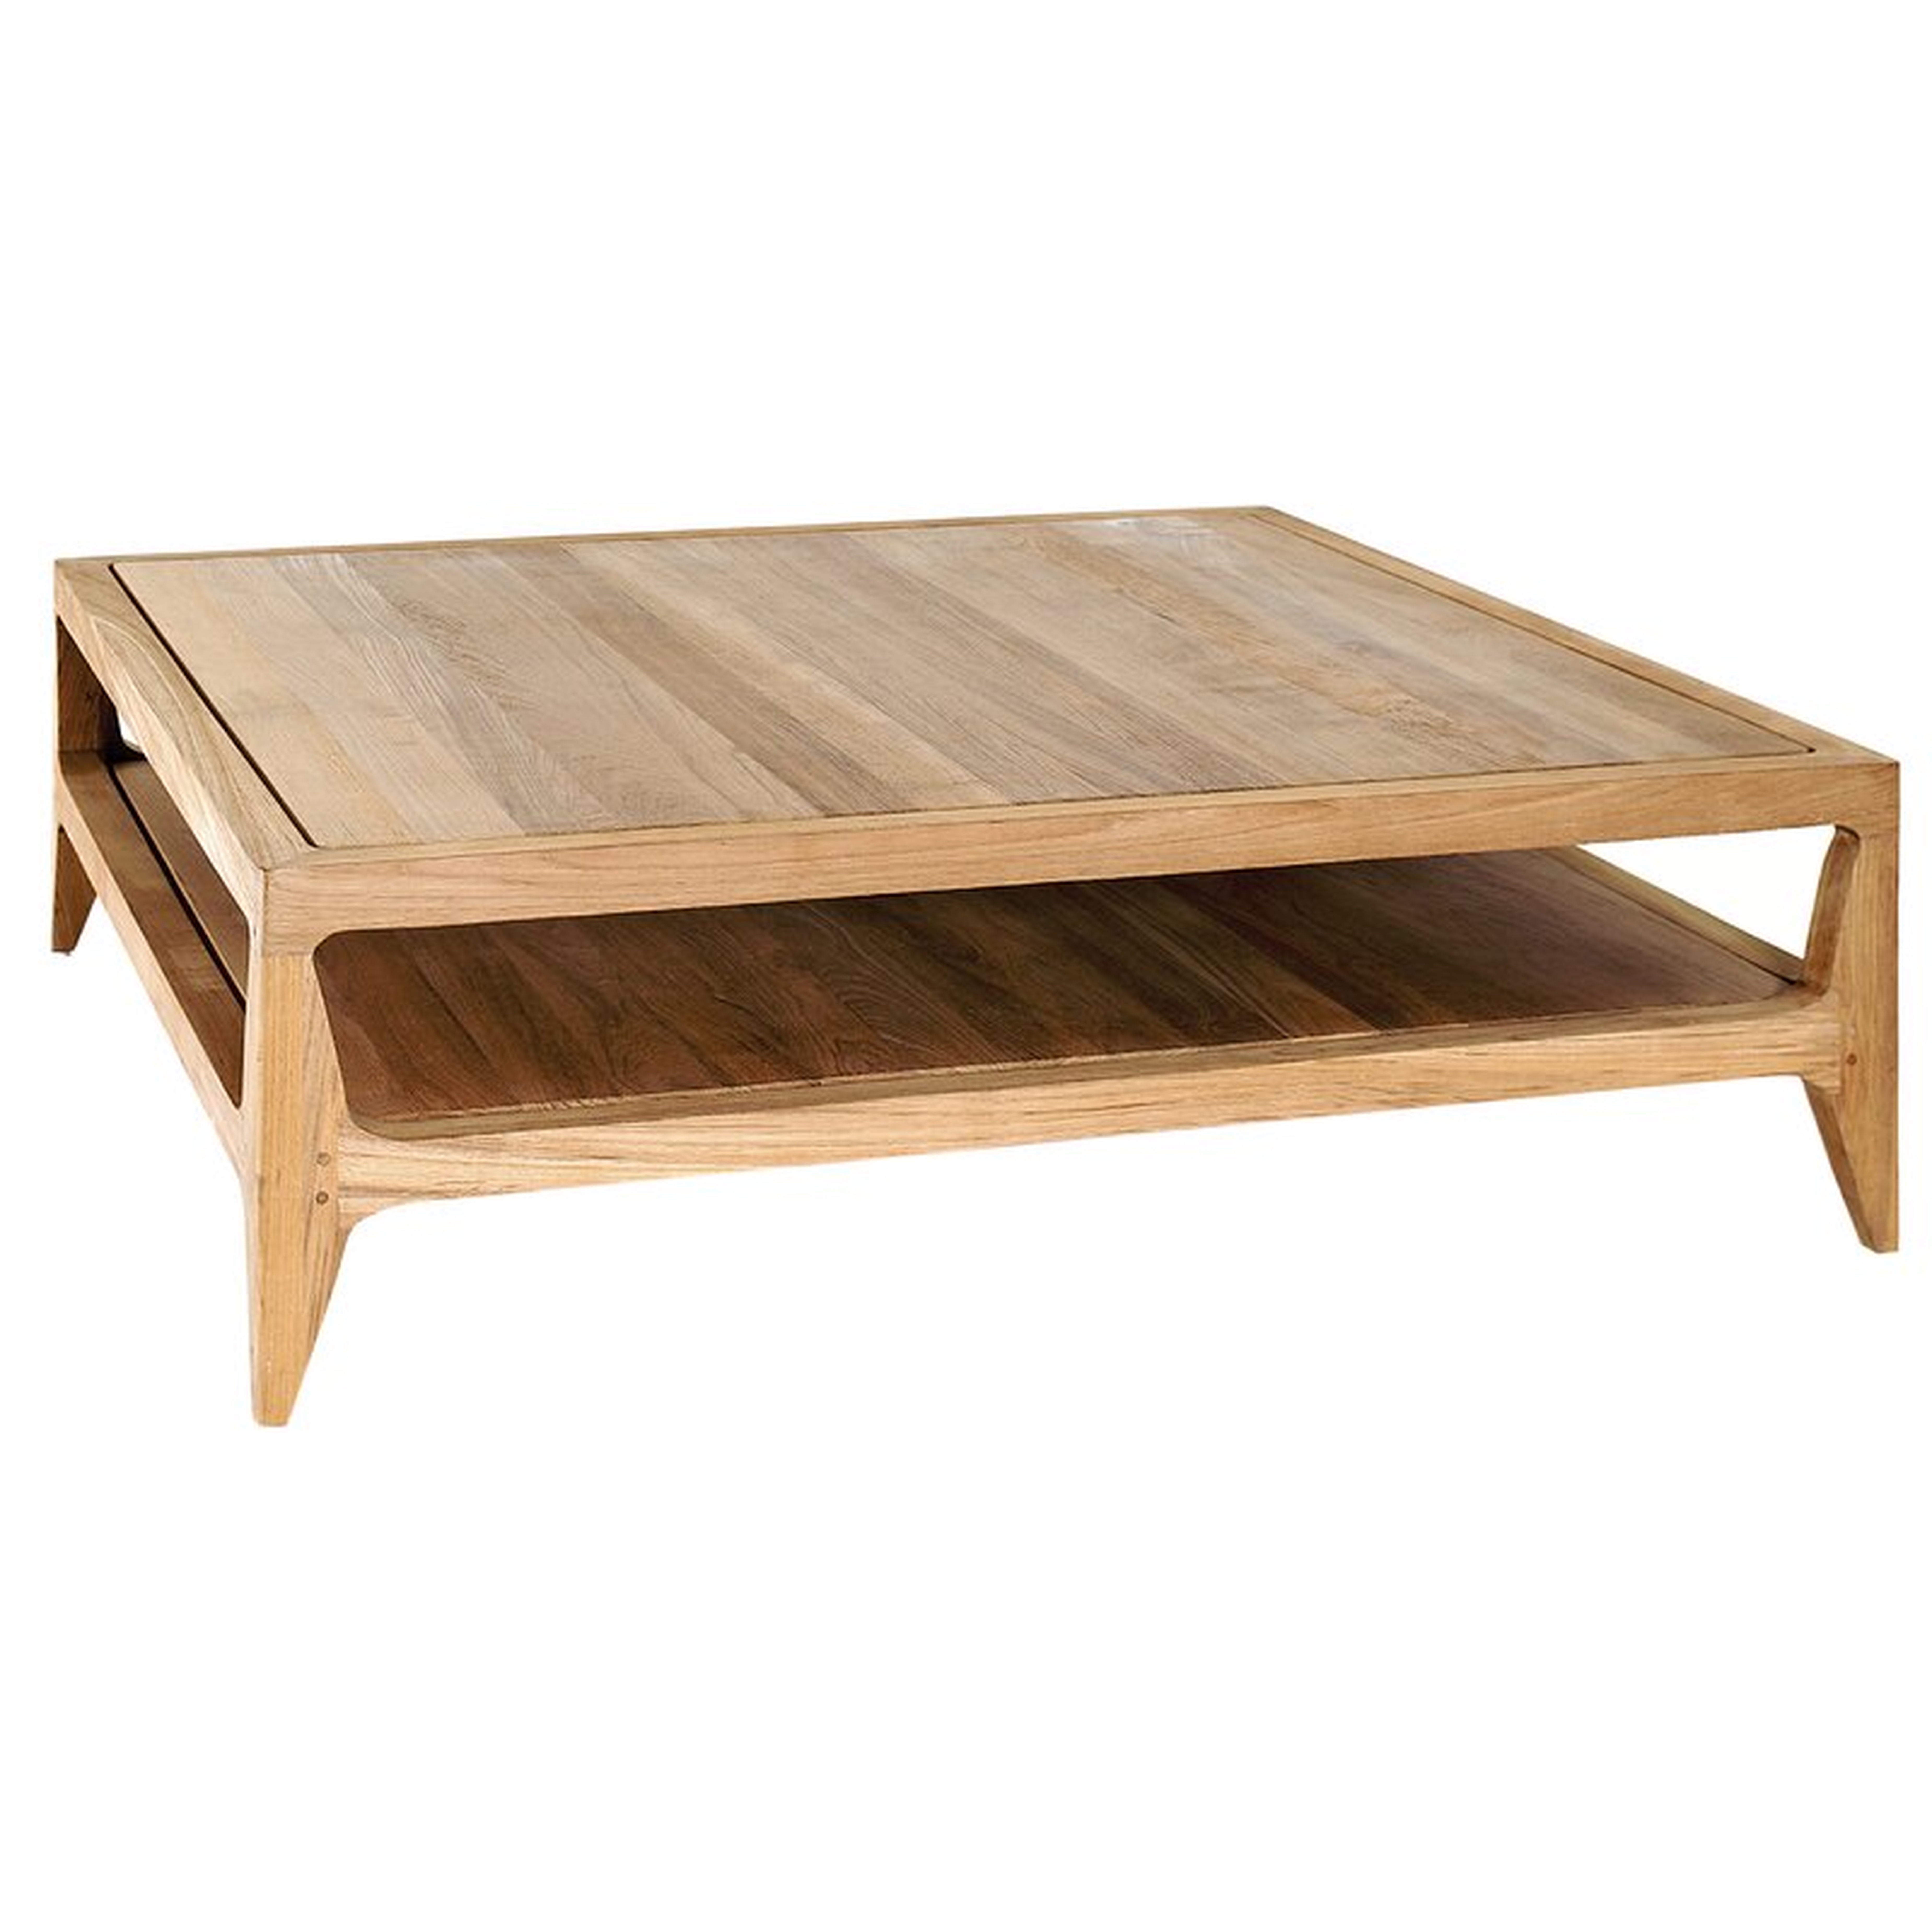 OASIQ Limited 300 Solid Wood 4 Legs Coffee Table with Storage - Perigold